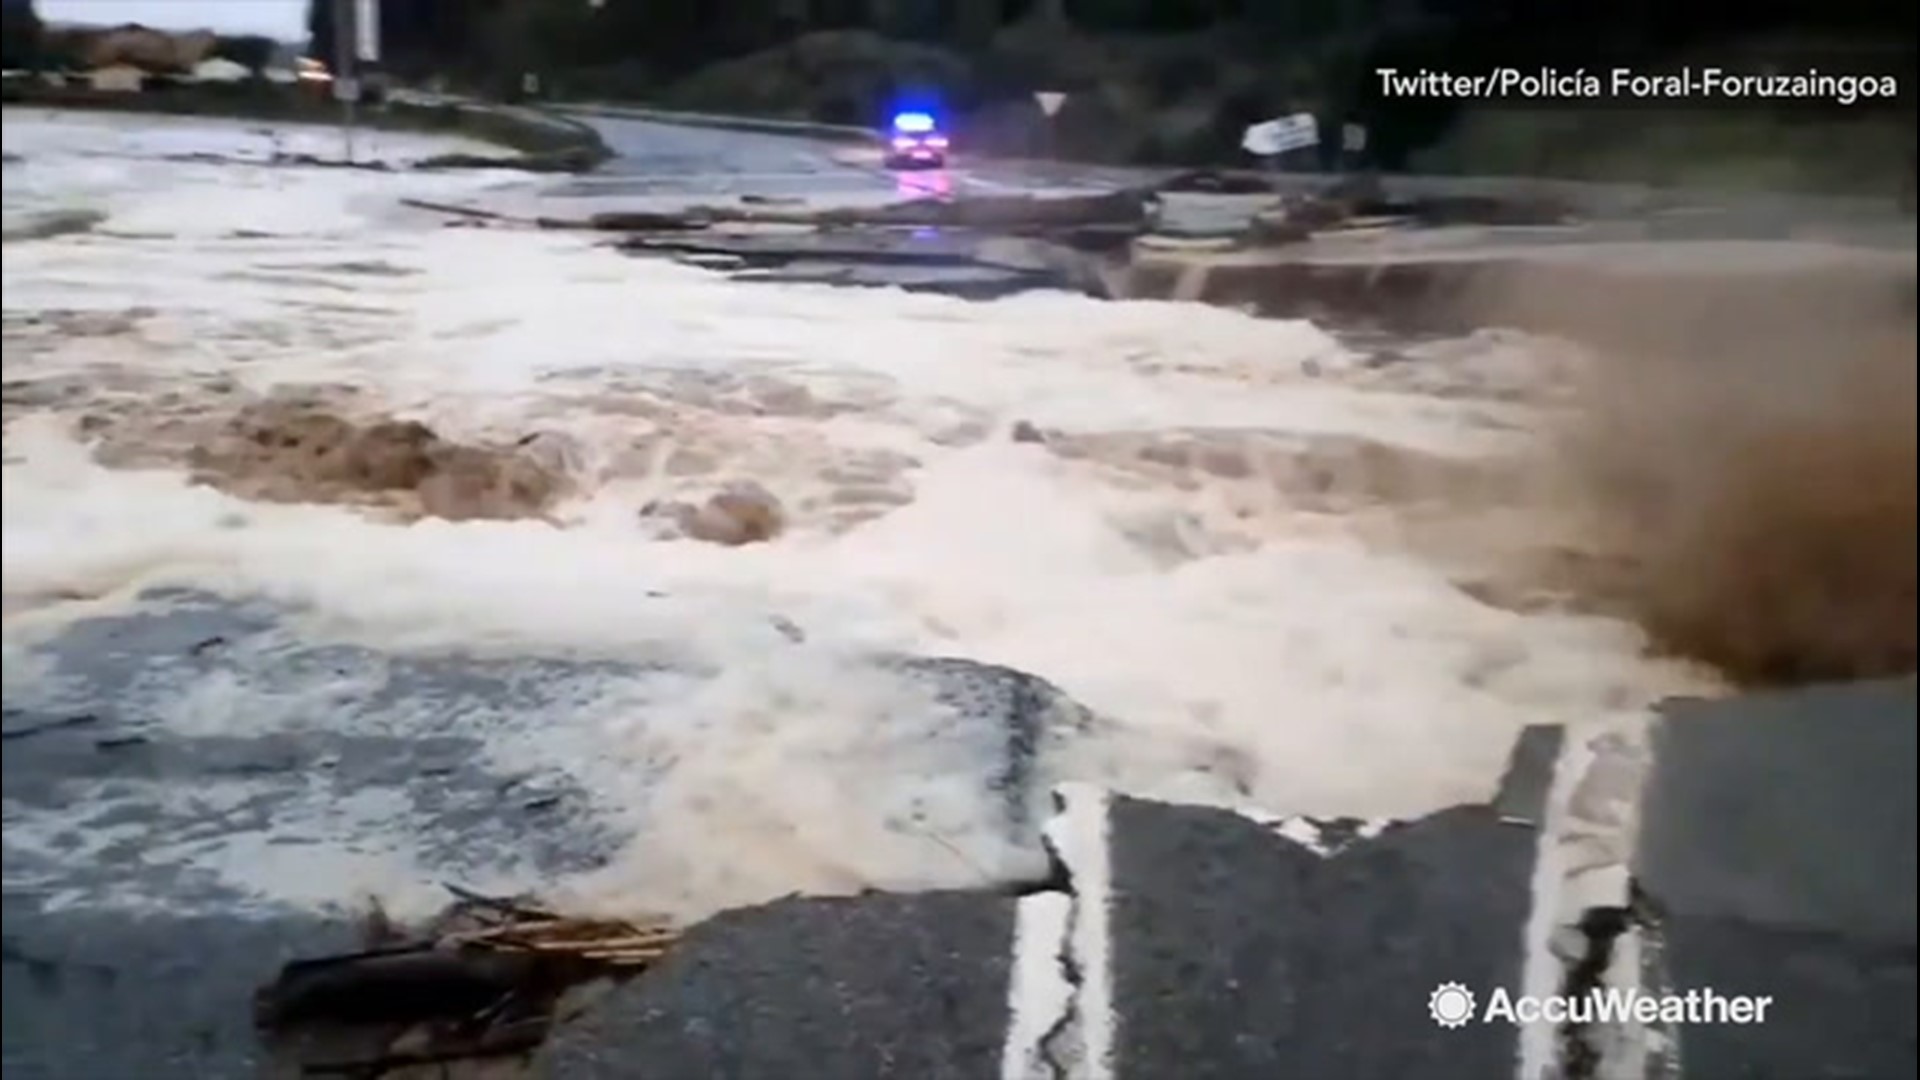 Those in the East US aren't the only once experiencing flash flooding. On July 8, in Pueyo, Spain, heavy rainfall caused flooding, which lead to sections of roads being washed away.